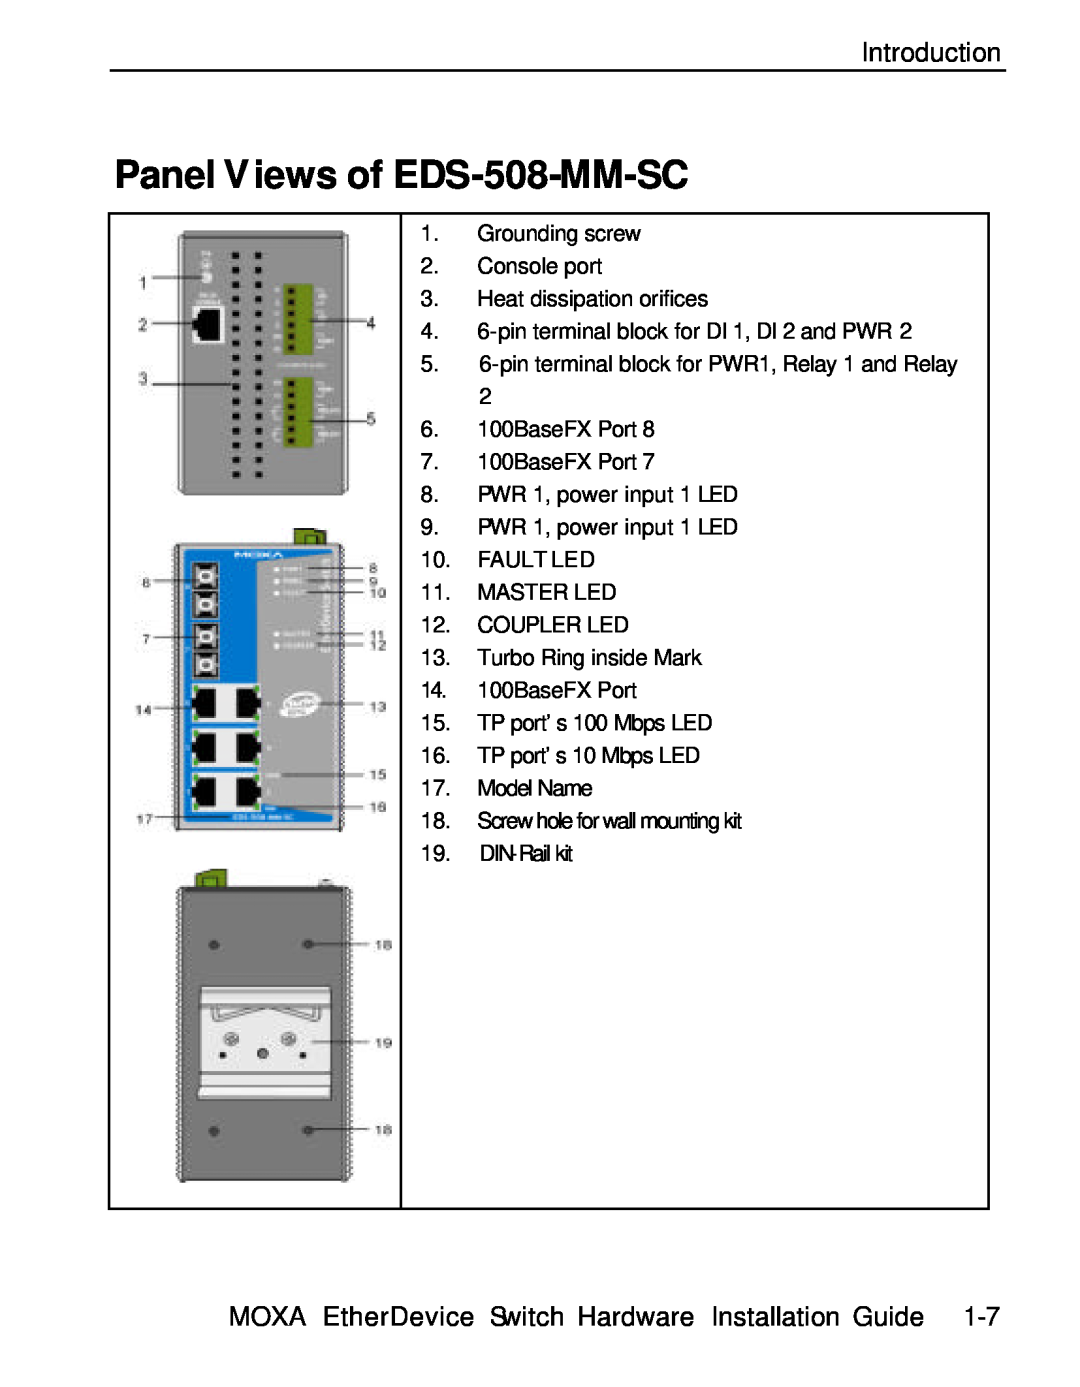 Moxa Technologies manual Panel Views of EDS-508-MM-SC, Introduction, MOXA EtherDevice Switch Hardware Installation Guide 